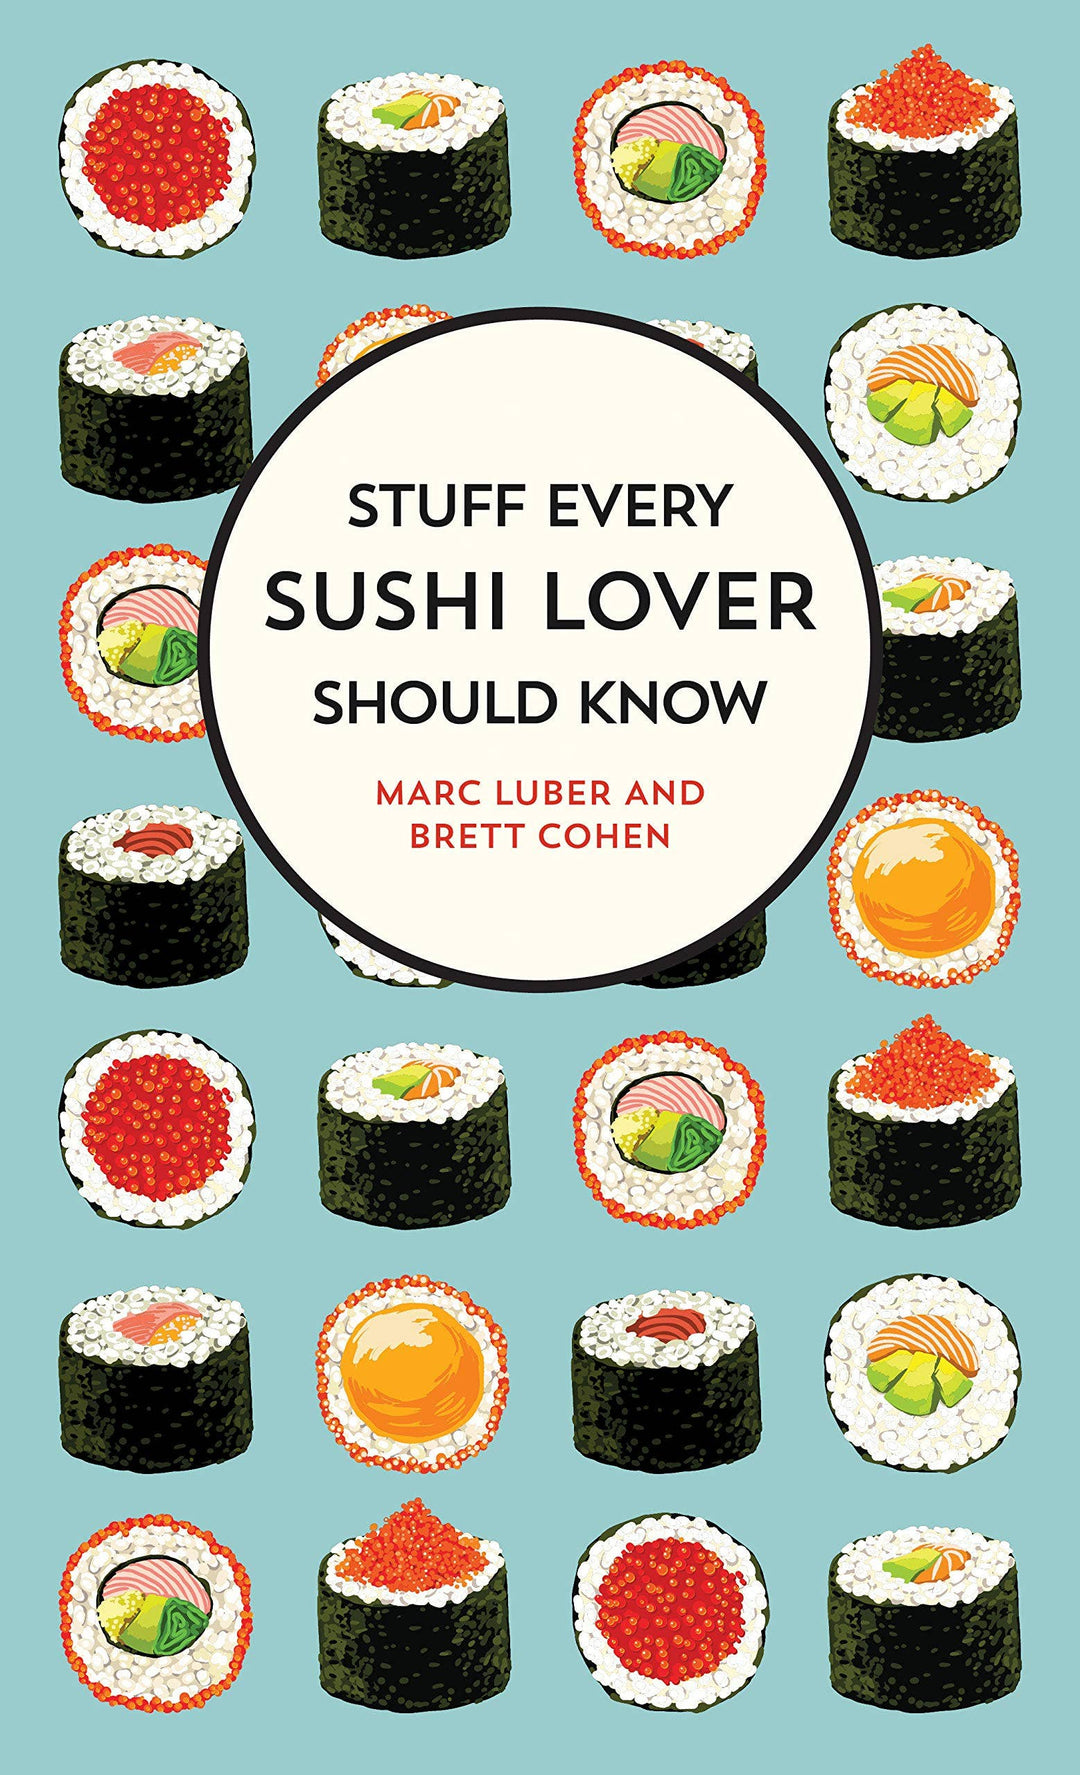 Microcosm Publishing & Distribution - Stuff Every Sushi Lover Should Know